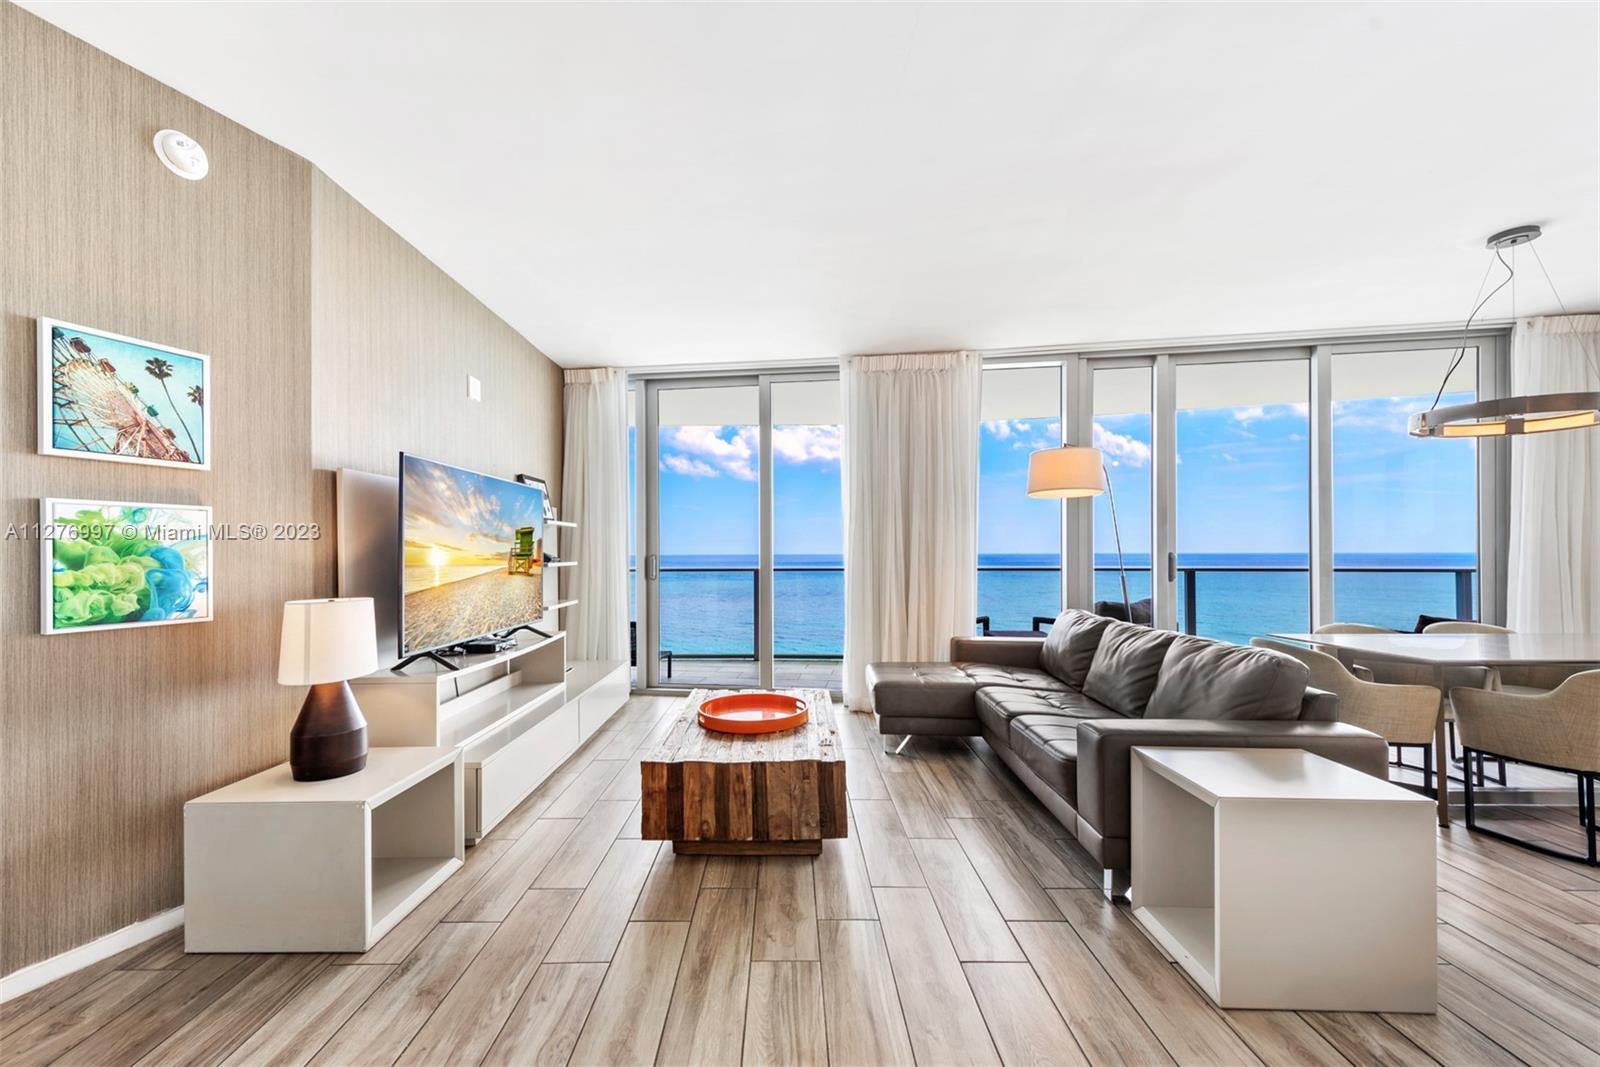 Your reimagined beach retreat awaits at HYDE RESORT & RESIDENCES, set on beautiful Hollywood Beach. 